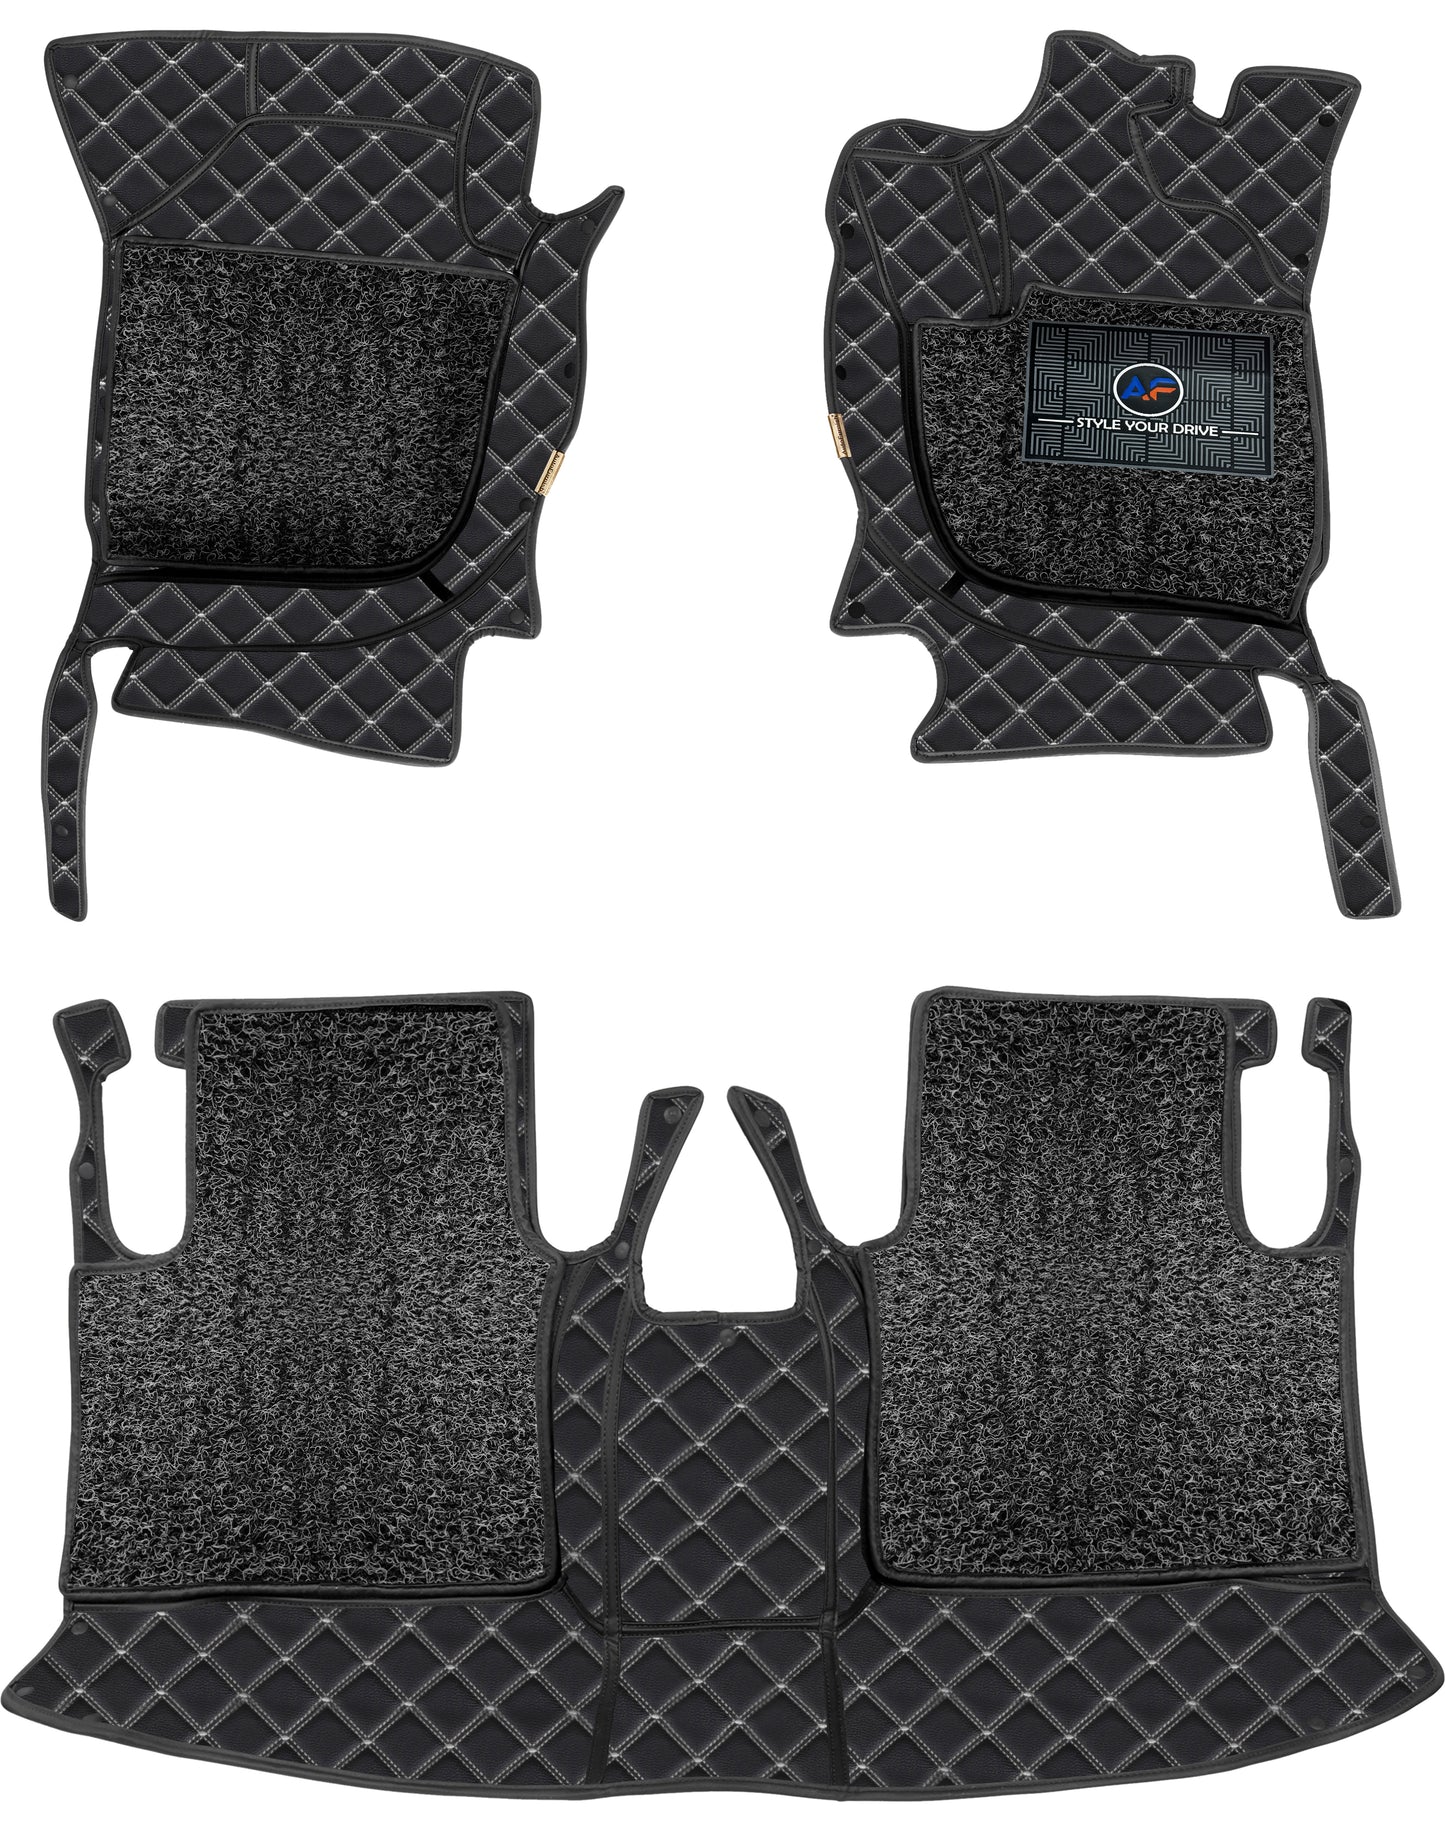 Maruti Celerio 2021-7D Luxury Car Mat, All Weather Proof, Anti-Skid, 100% Waterproof & Odorless with Unique Diamond Fish Design (24mm Luxury PU Leather, 2 Rows)